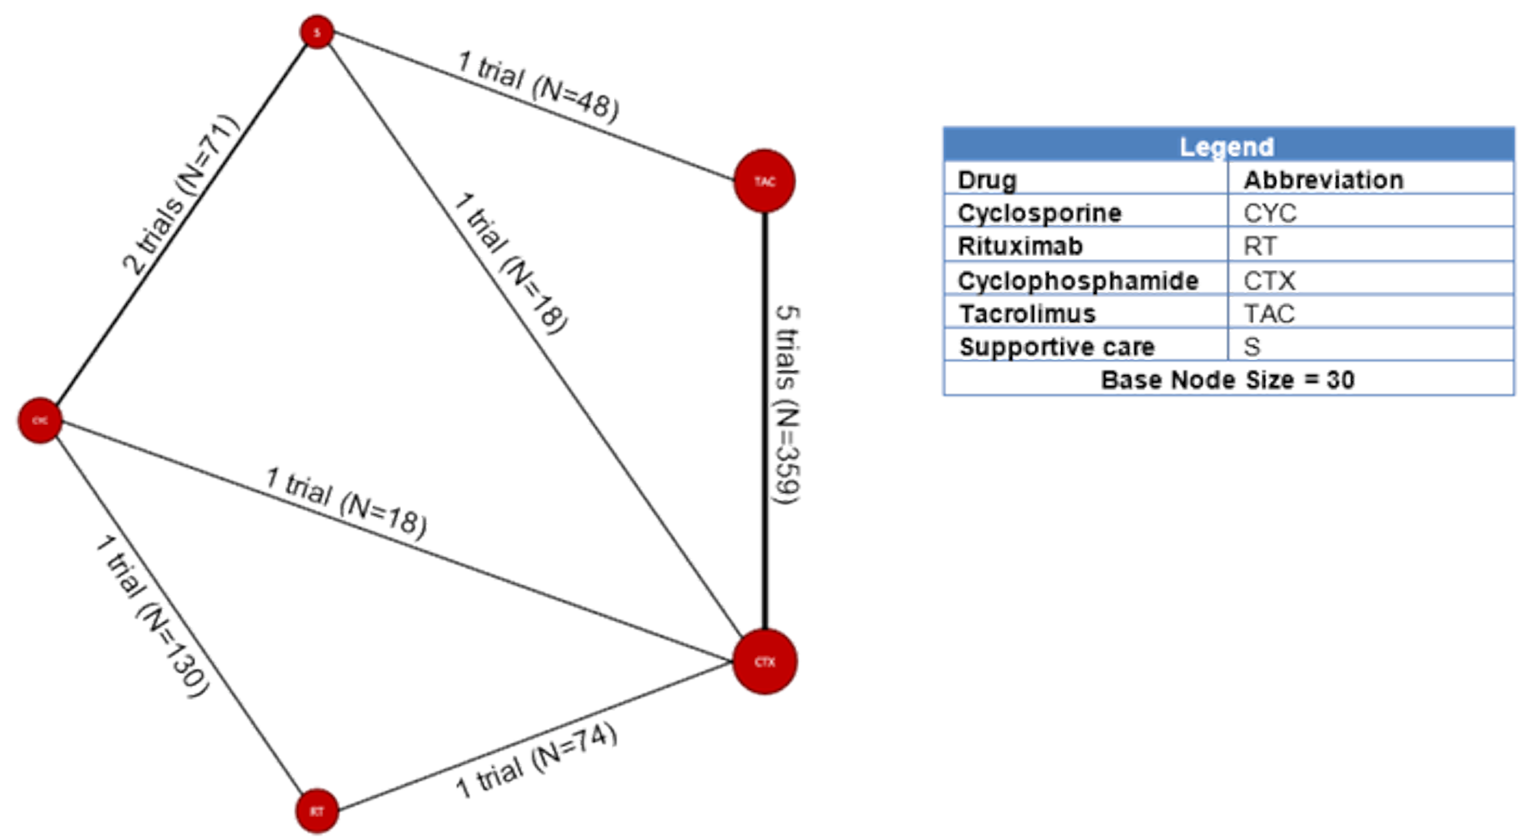 This figure shows the network meta-analysis for any remission at 12 months.